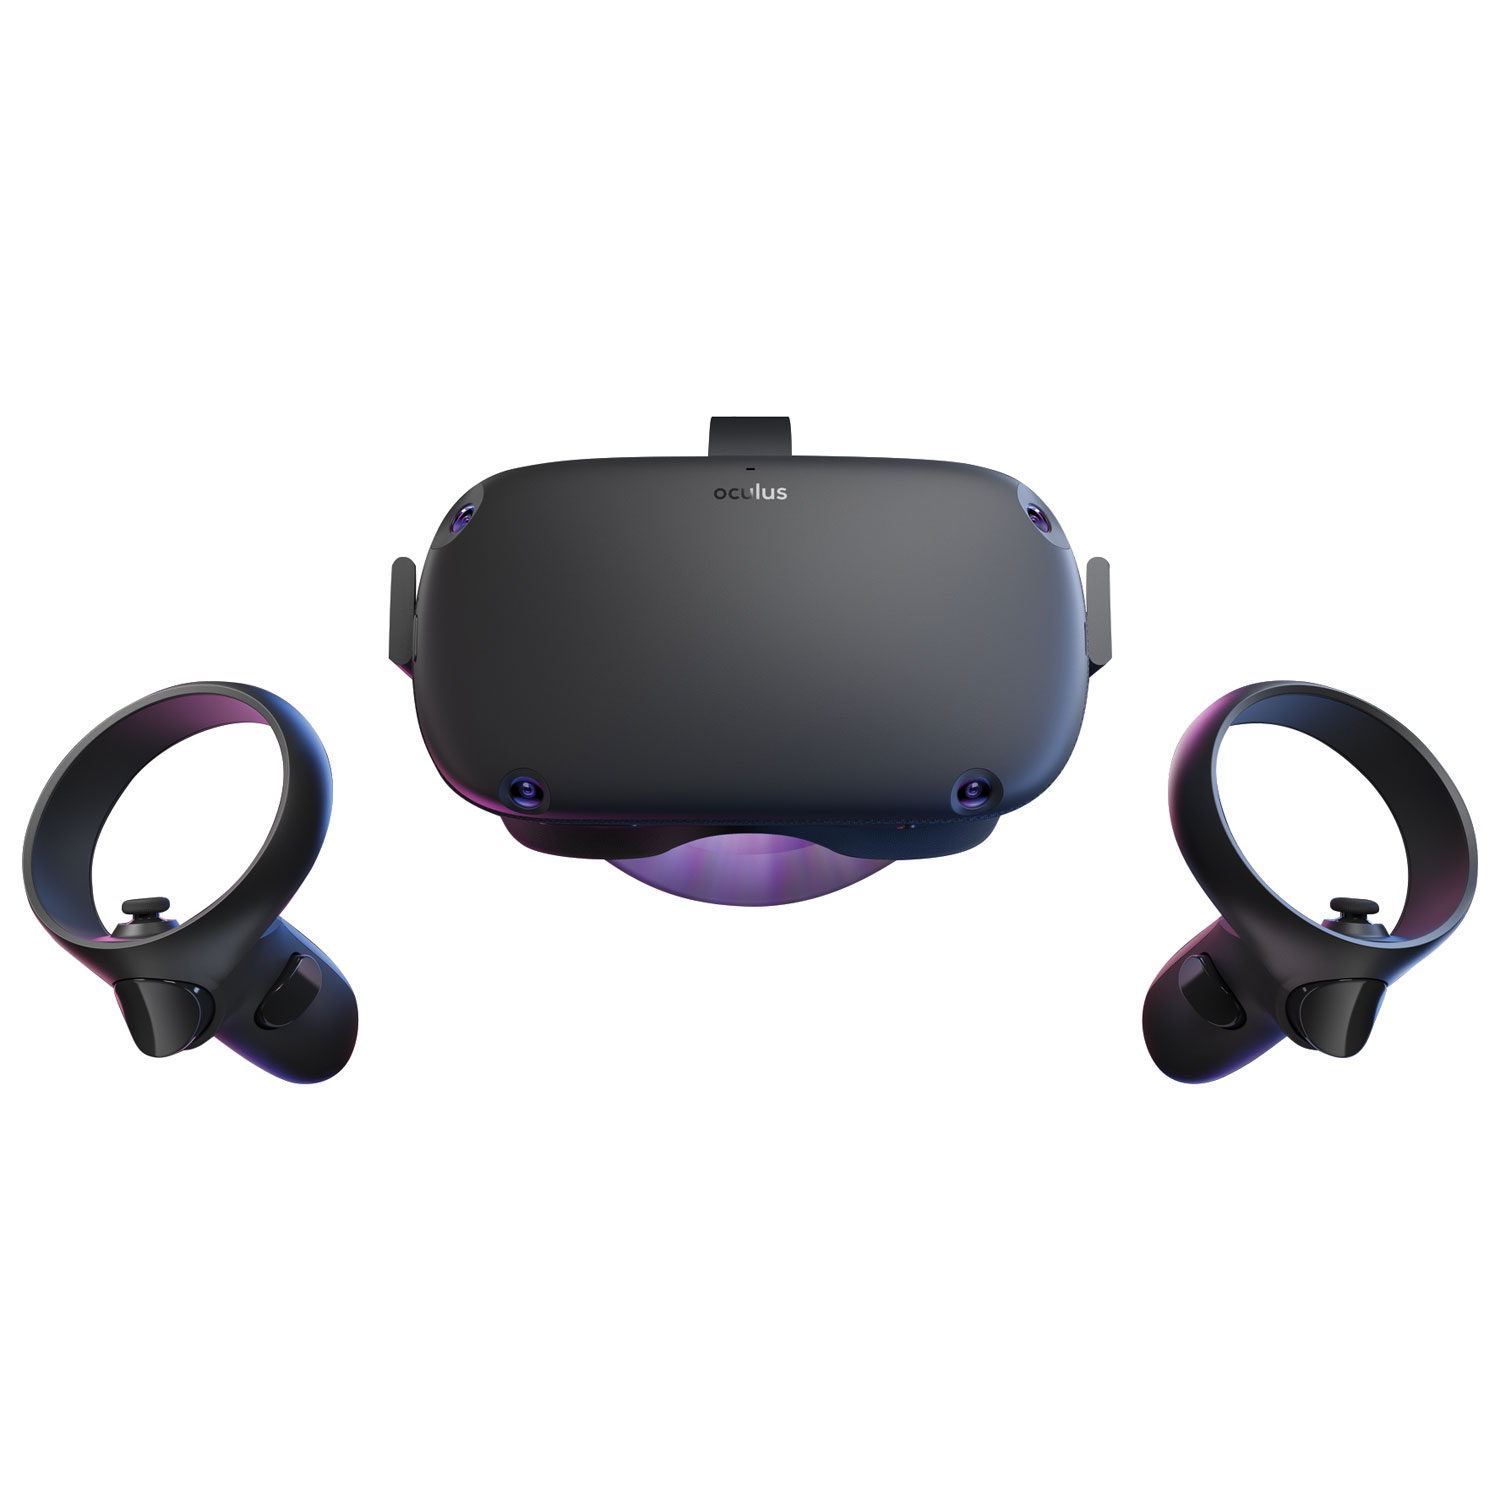 vr headset which one to buy